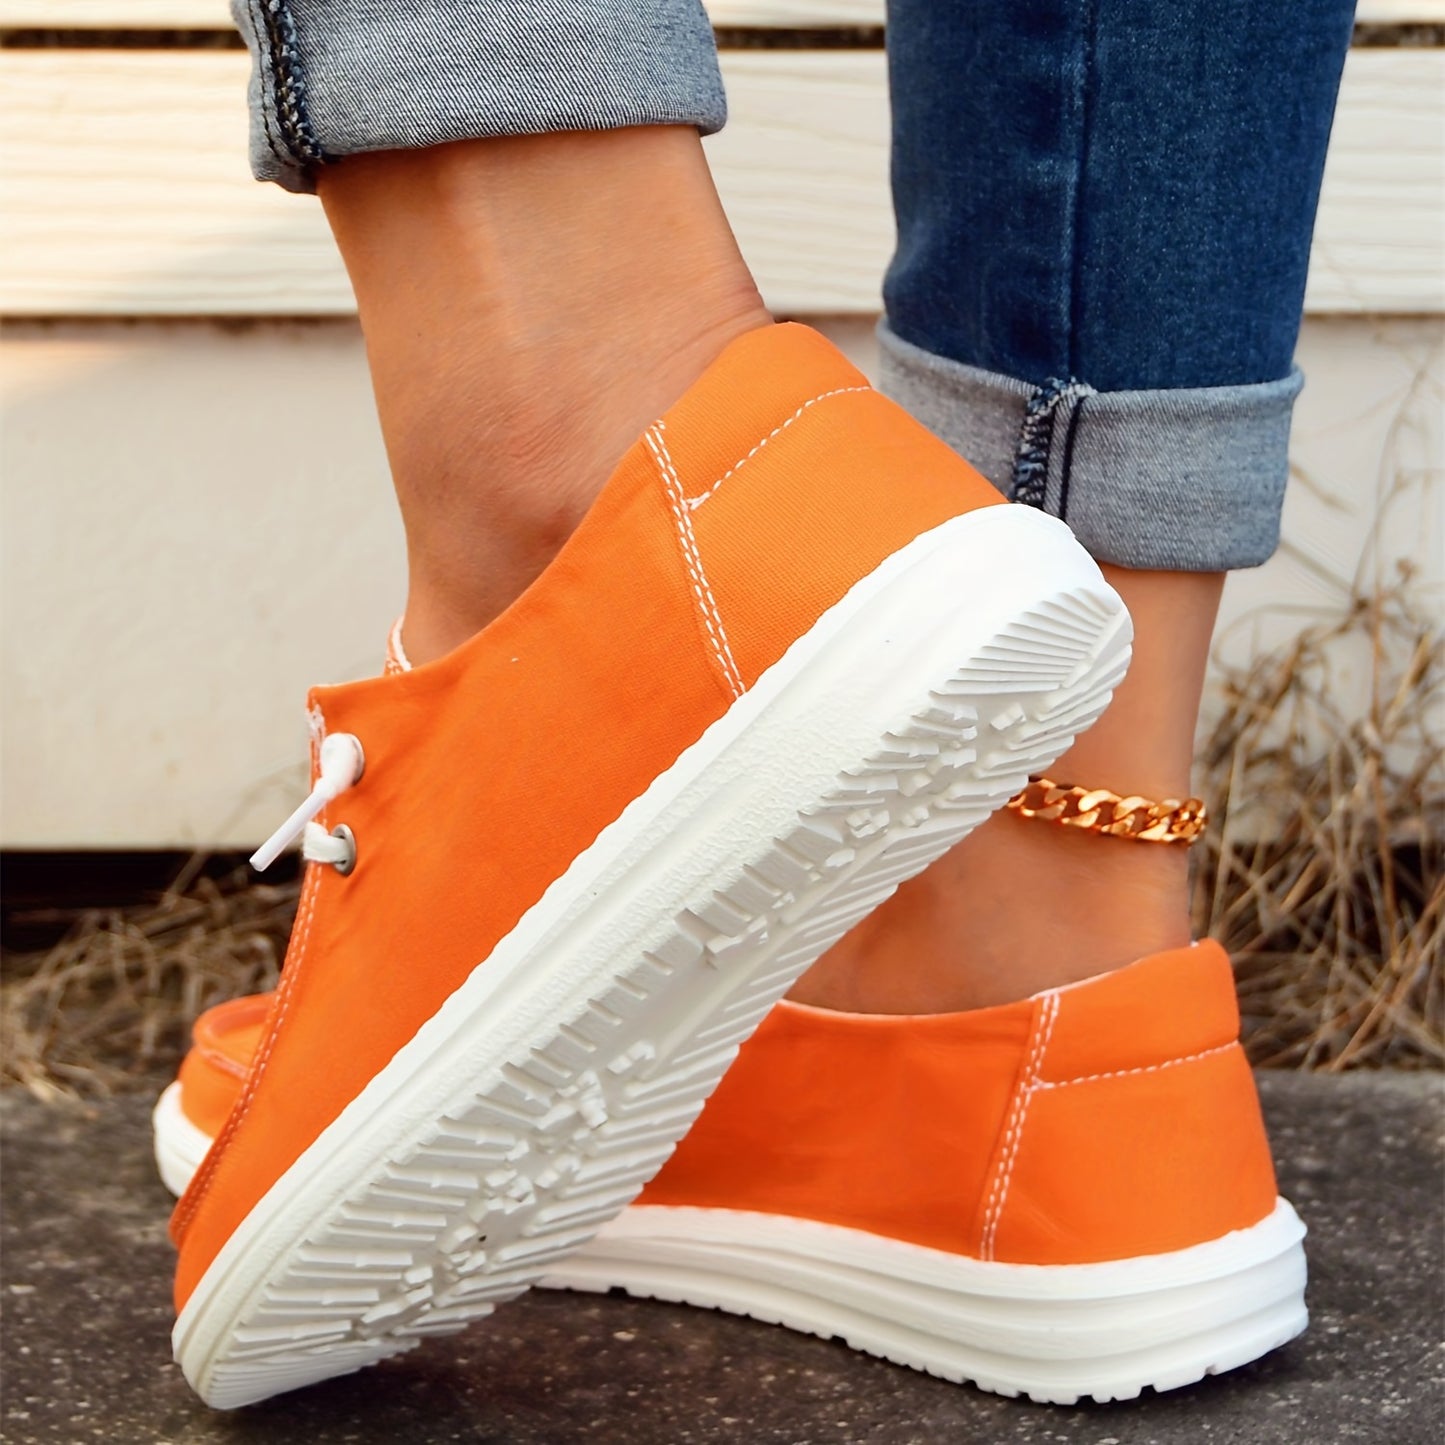 Women's Orange Canvas Shoes, Low Top Lace Up Round Toe Casual Shoes, Women's Lightweight Footwear